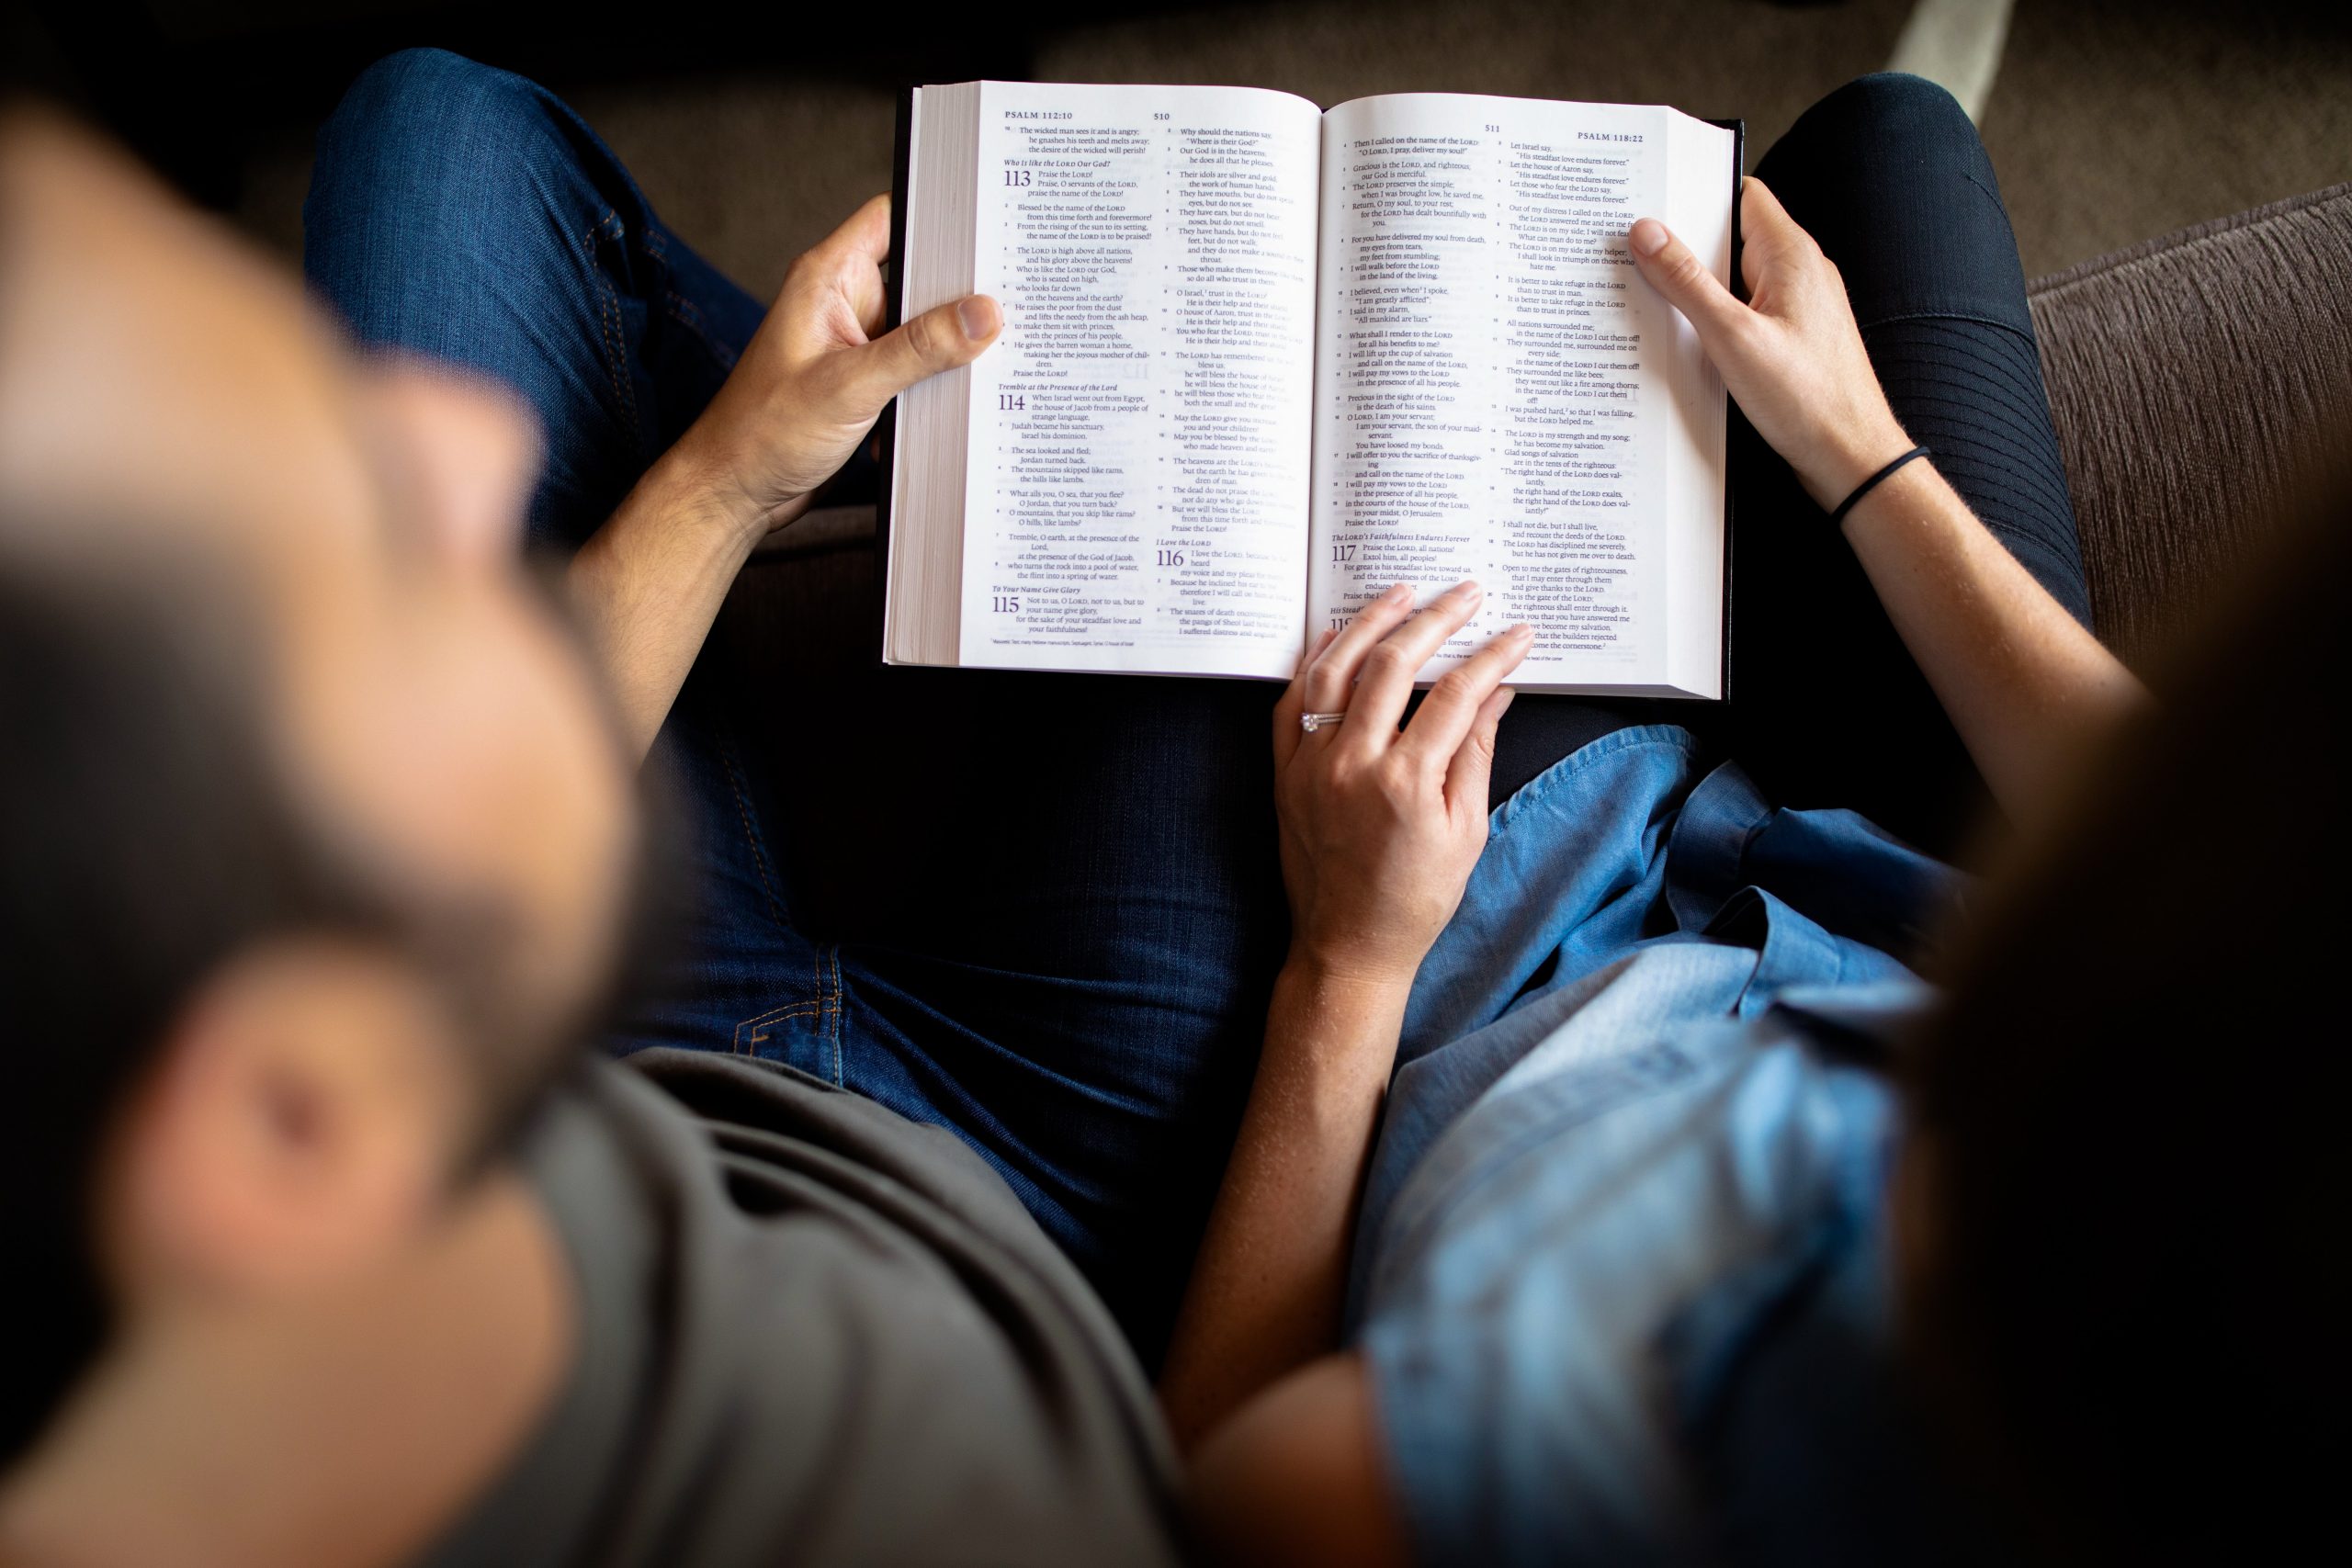 One-to-One Bible Reading